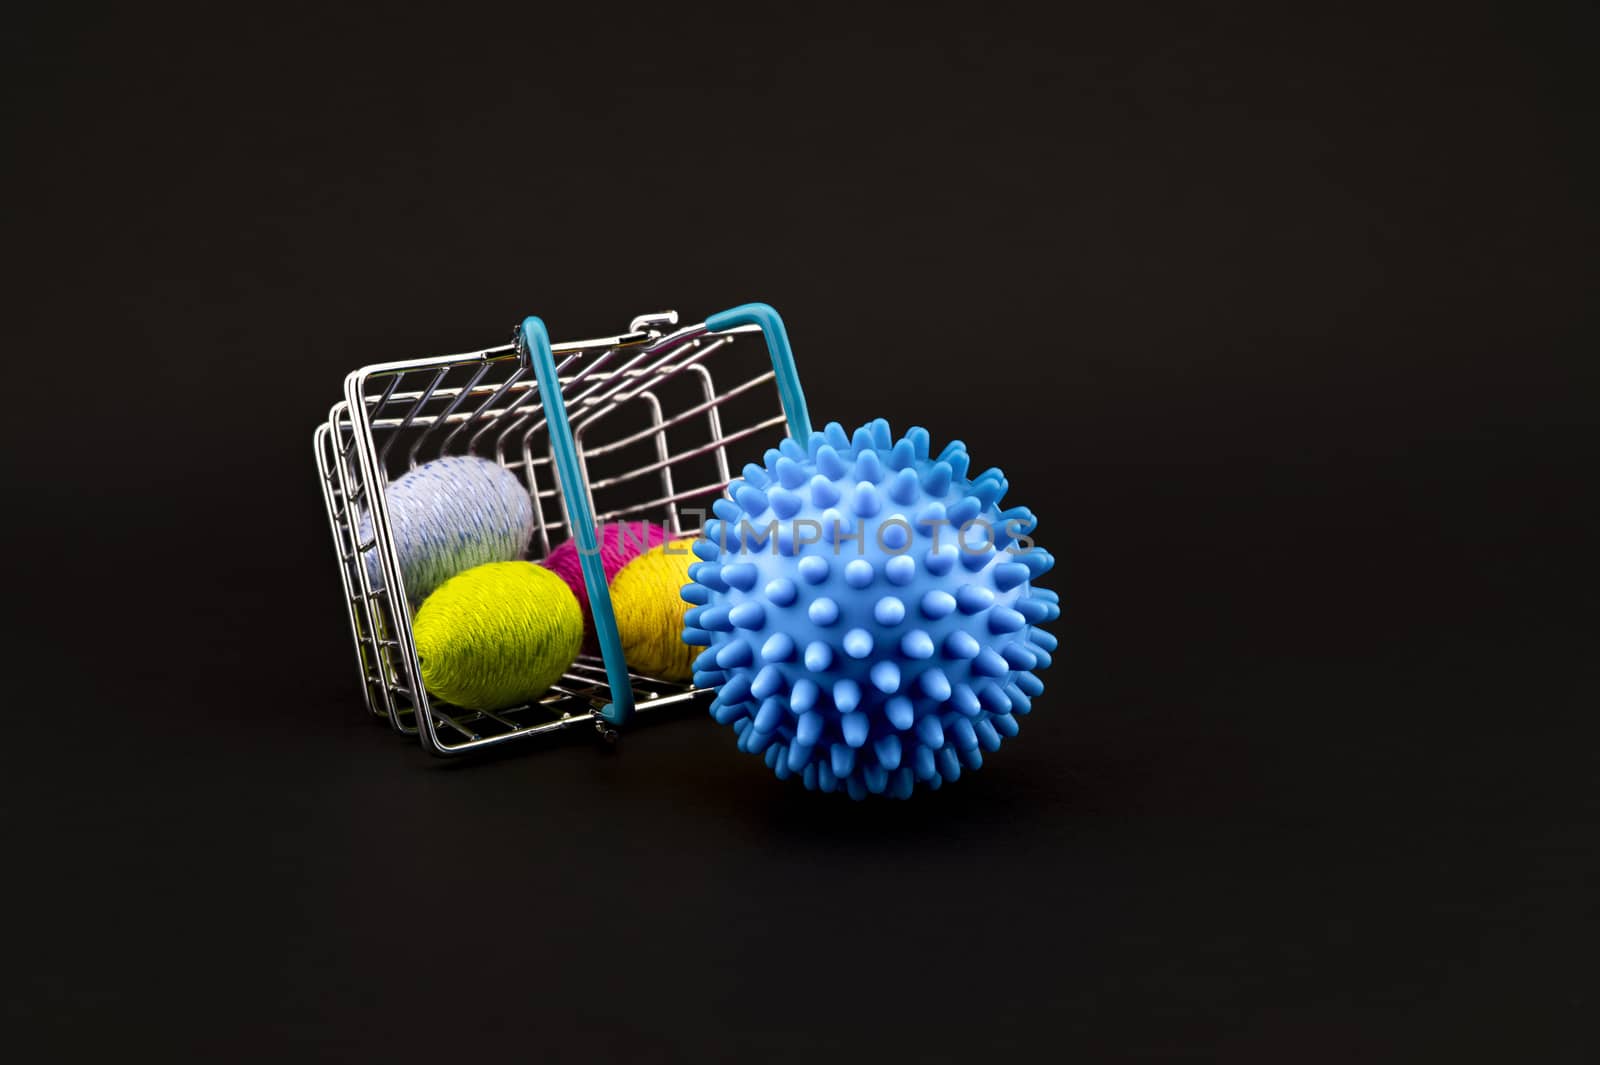 Virus molecule on a shopping basket and Easter eggs by NetPix